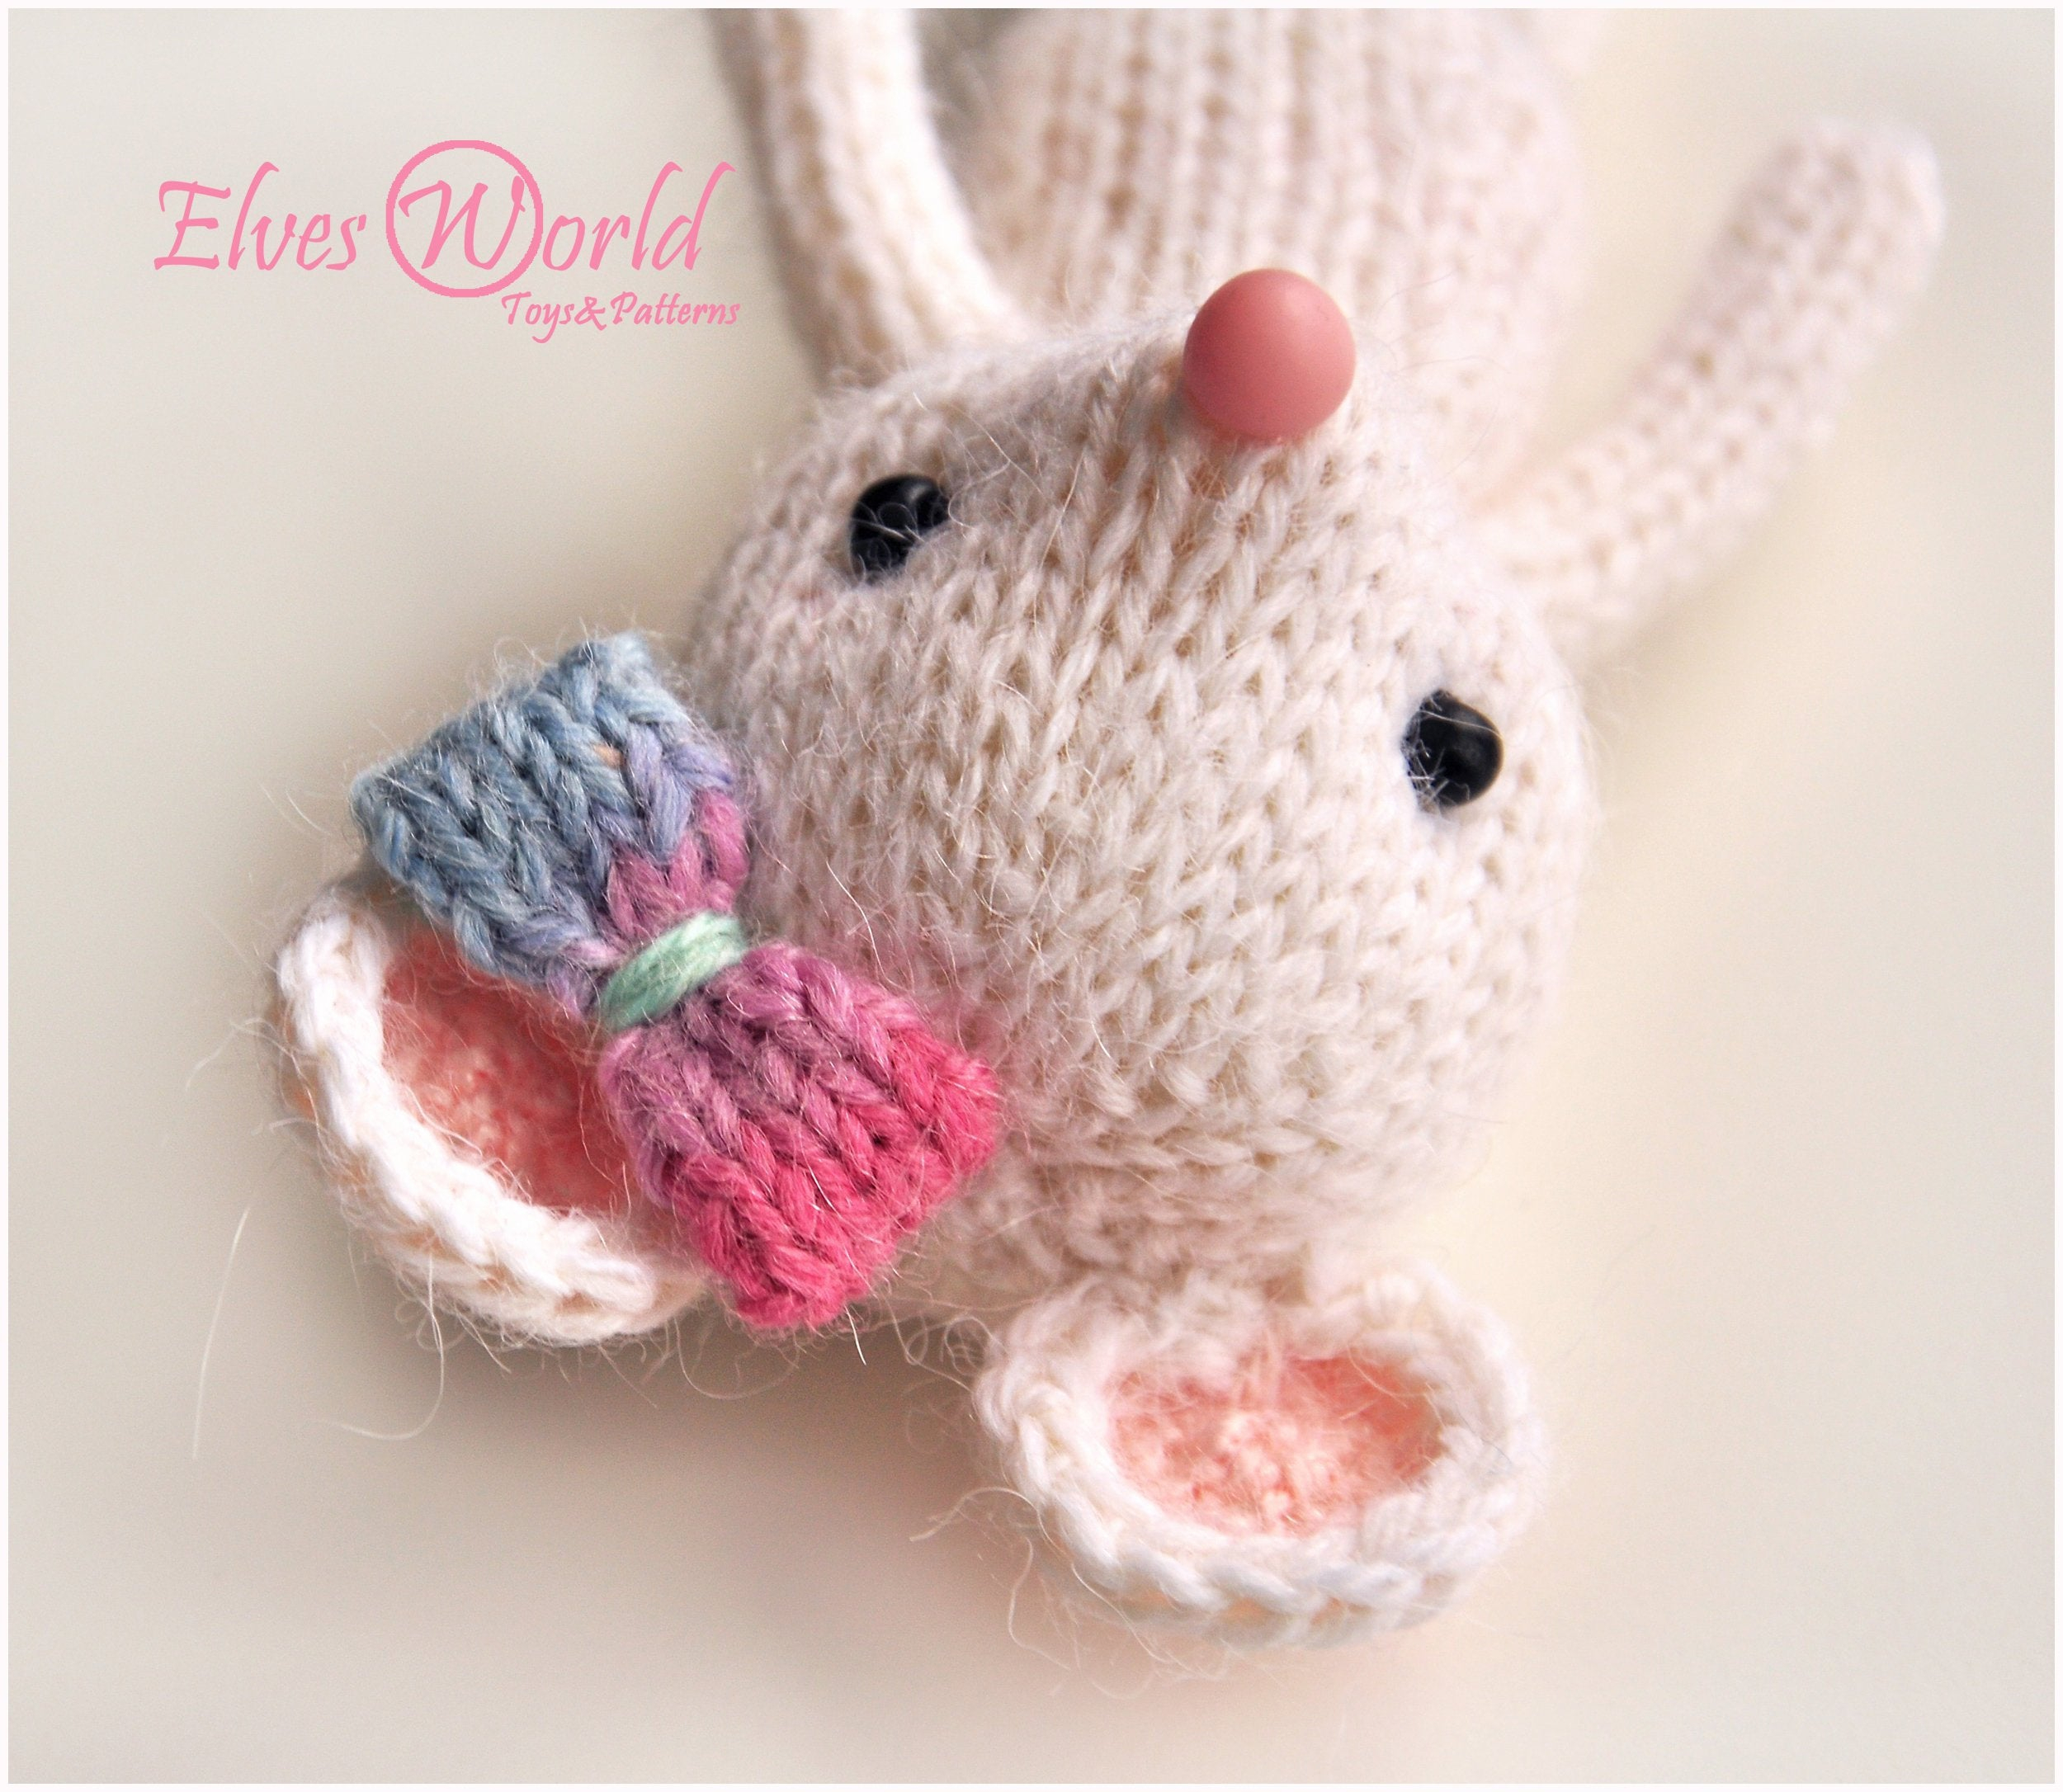 Knitting Patterns For Baby Toys Knitting Patterns Toy Mouse Pdf Knitted Animal Pattern Stuffed Toy Making Diy Toy Ba Mouse Valentine Amigurumi Pattern Patterns Ba Toy